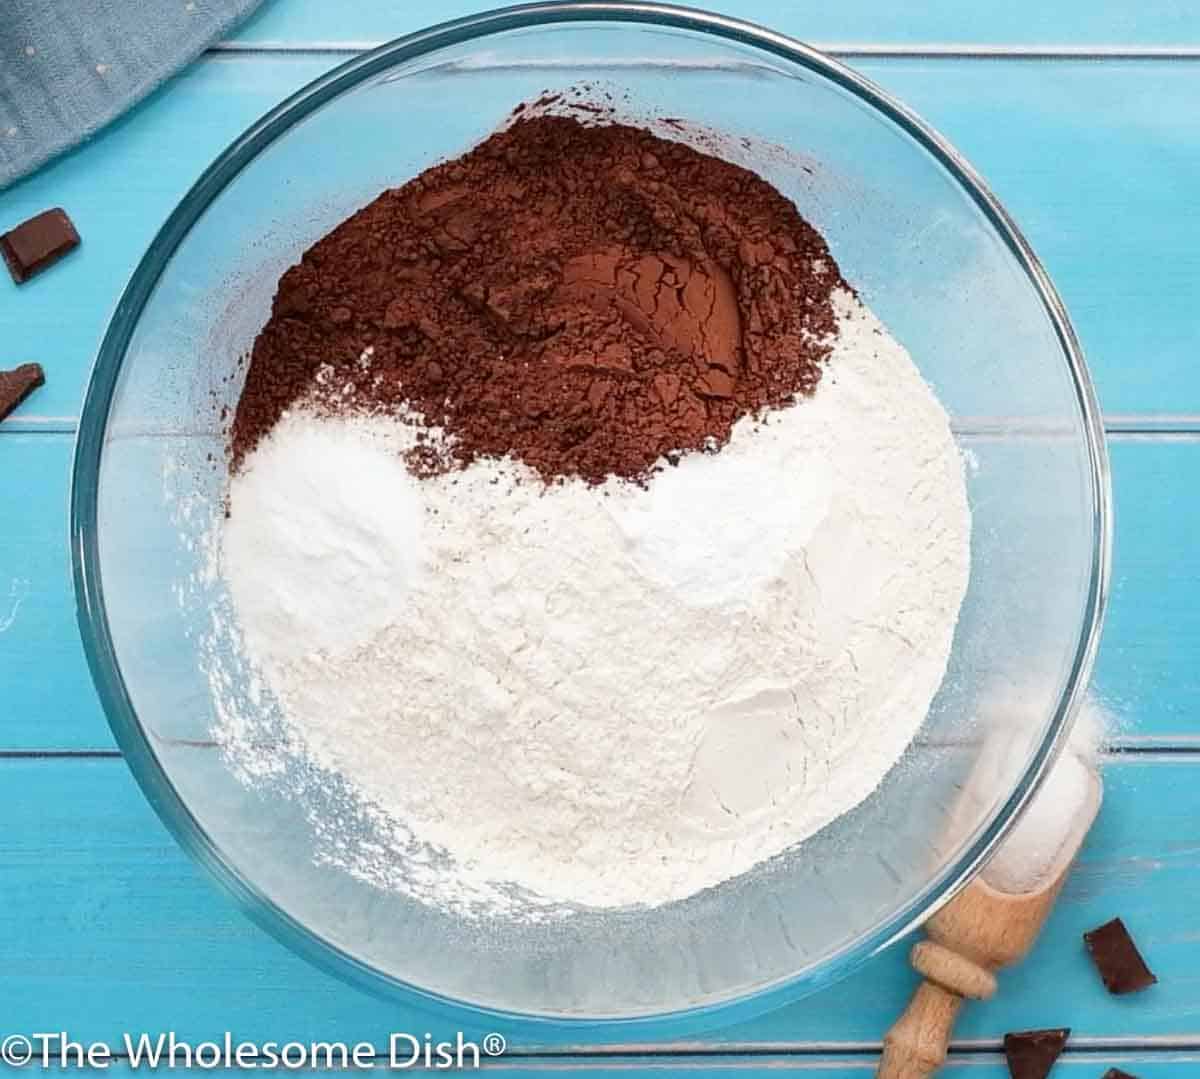 dry ingredients for homemade chocolate cake in a mixing bowl